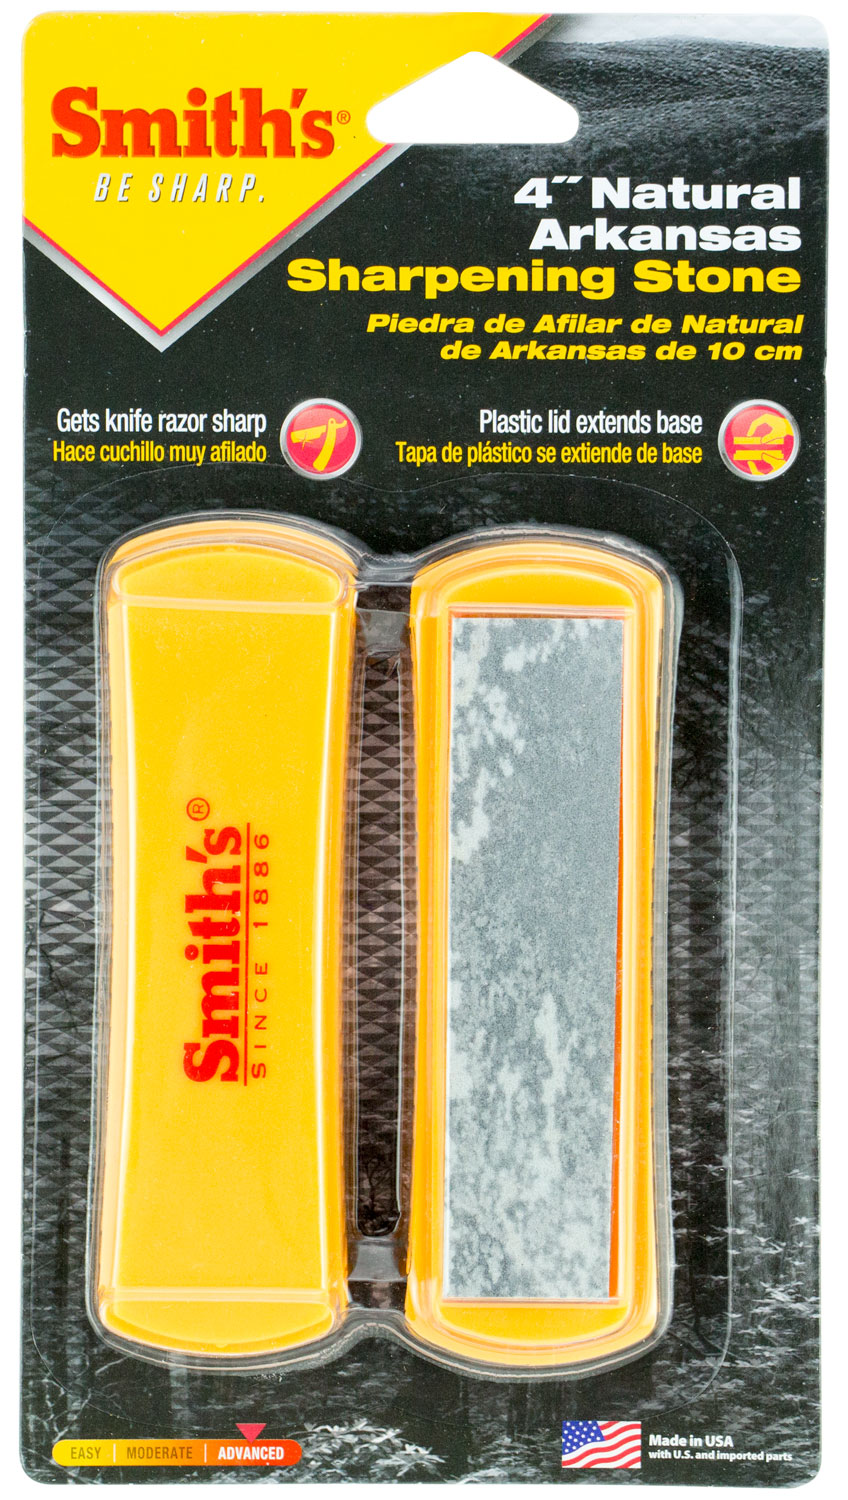 Smiths Products 50556 Arkansas Sharpening Stone Hand Held 4